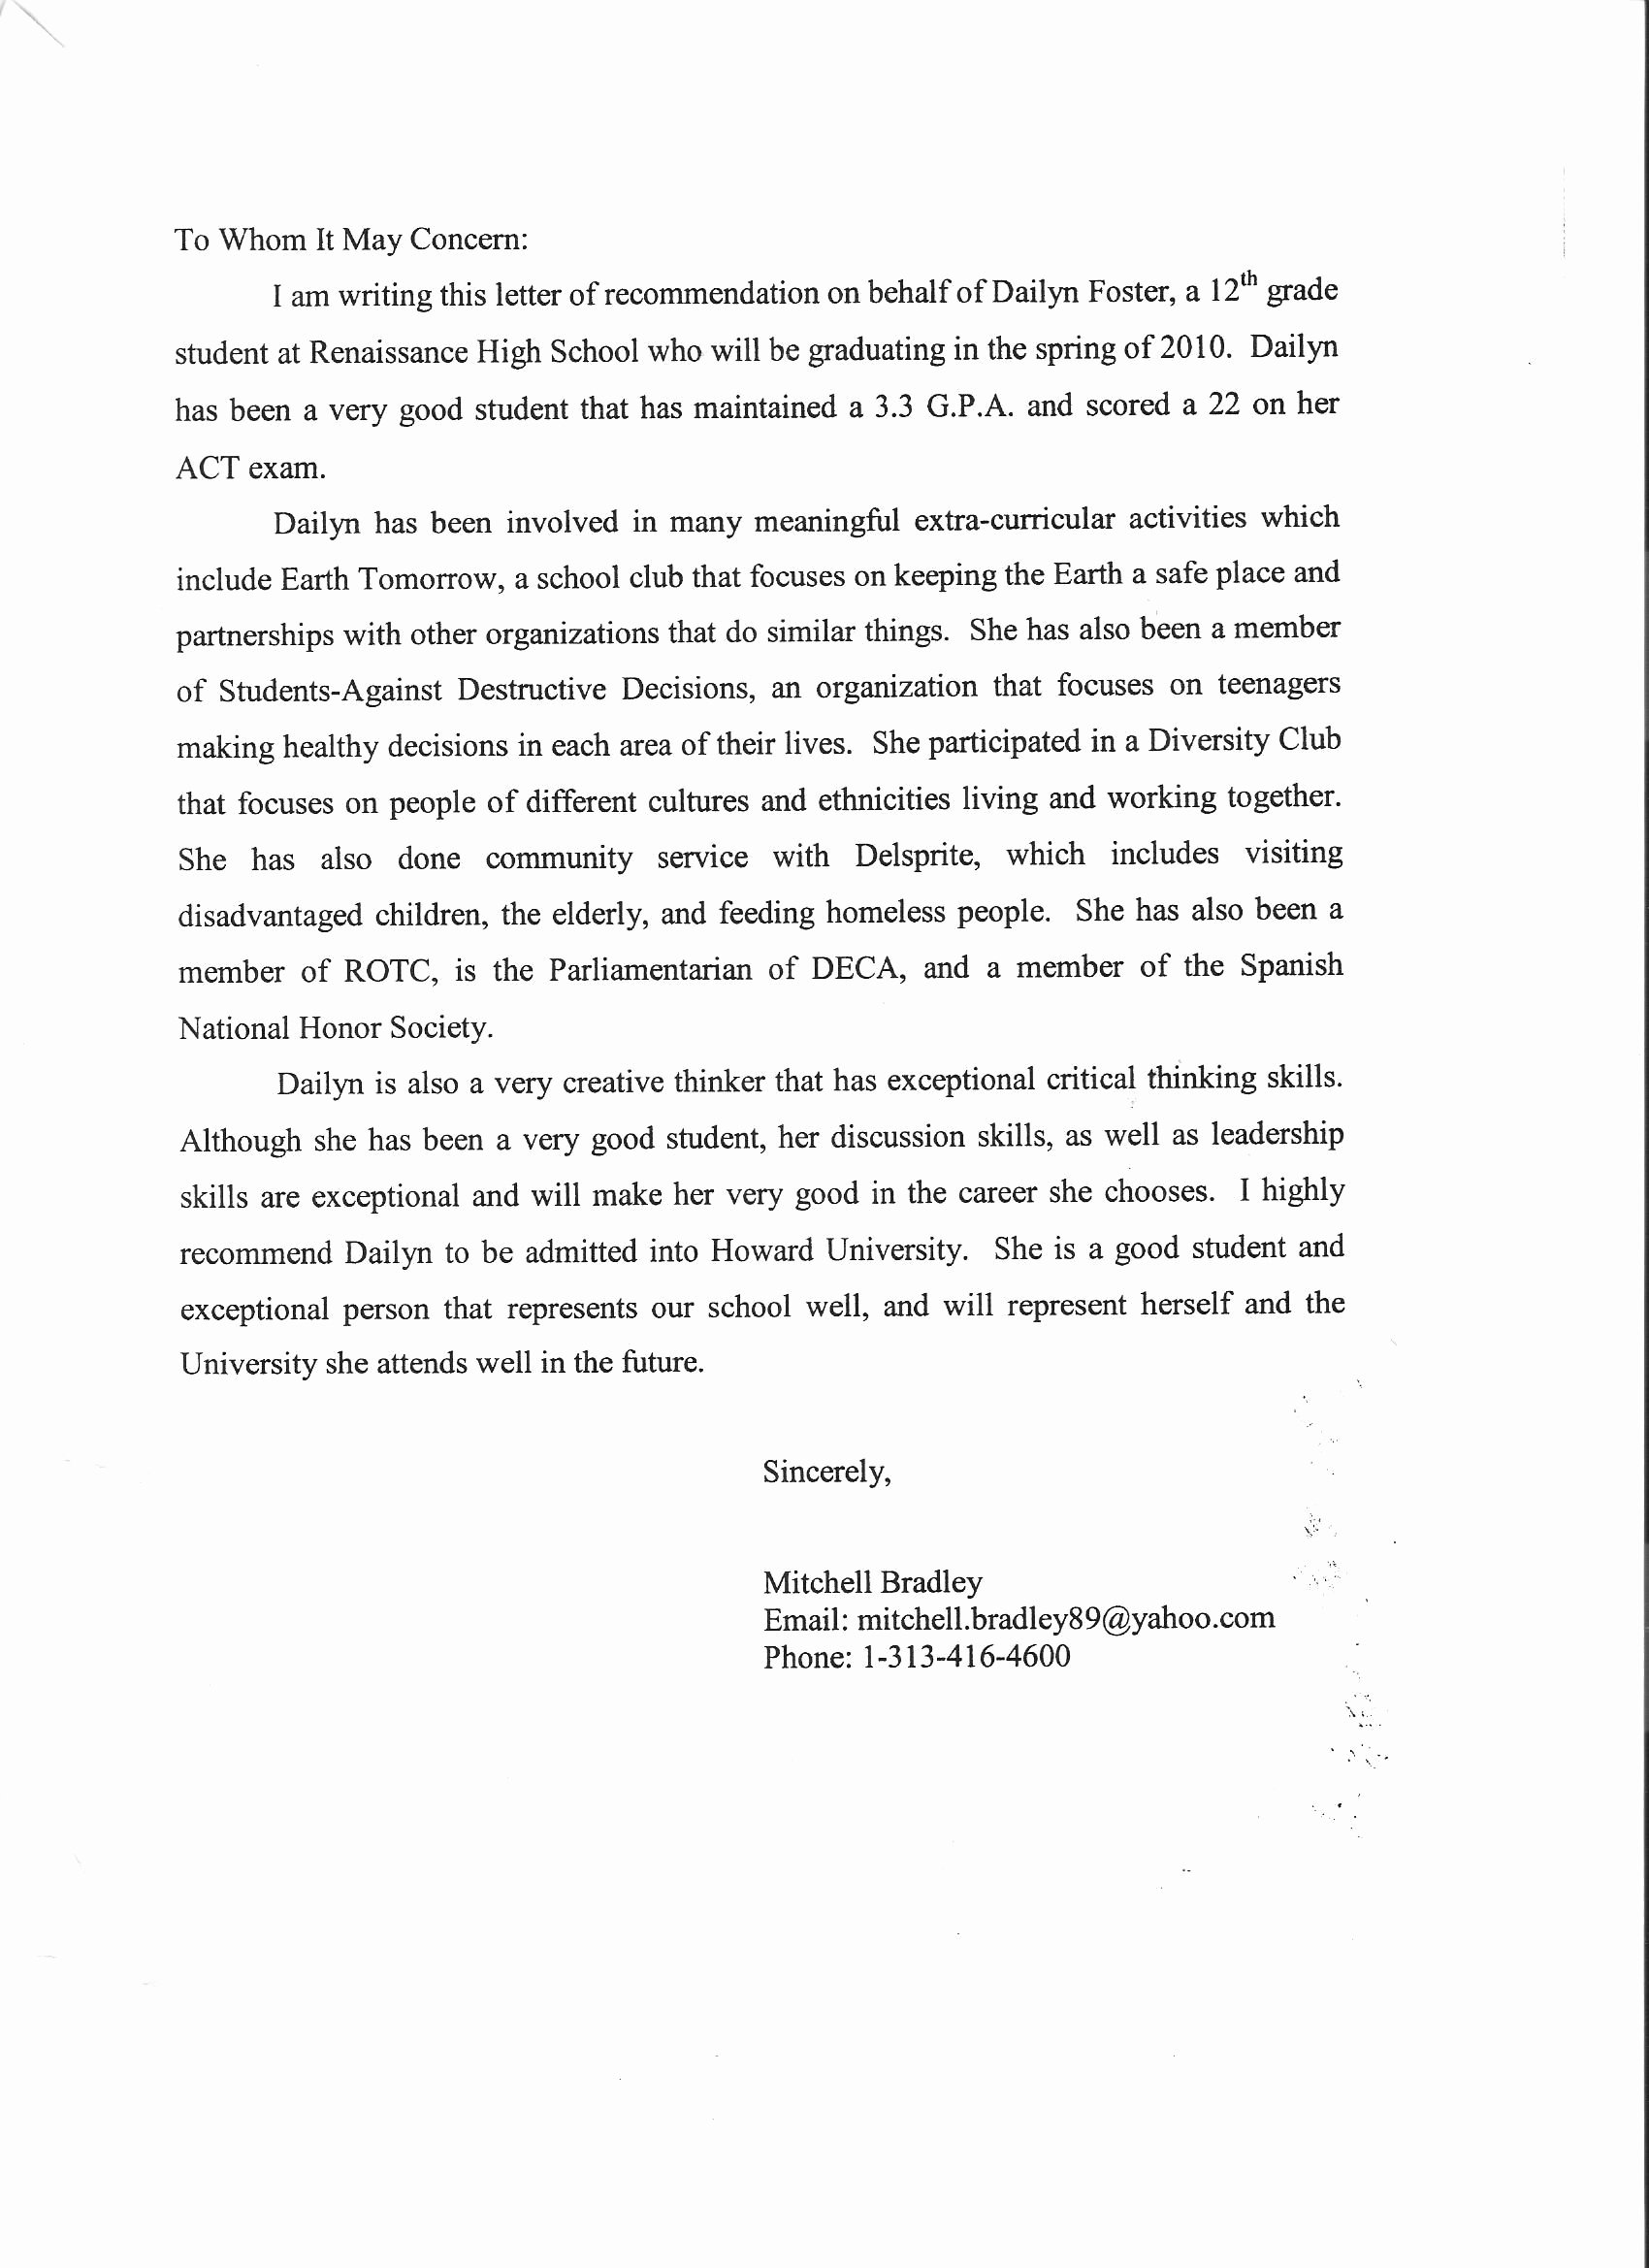 Parents Letter Of Recommendation Beautiful Re Mendation Letter Sample for Teacher From Parent